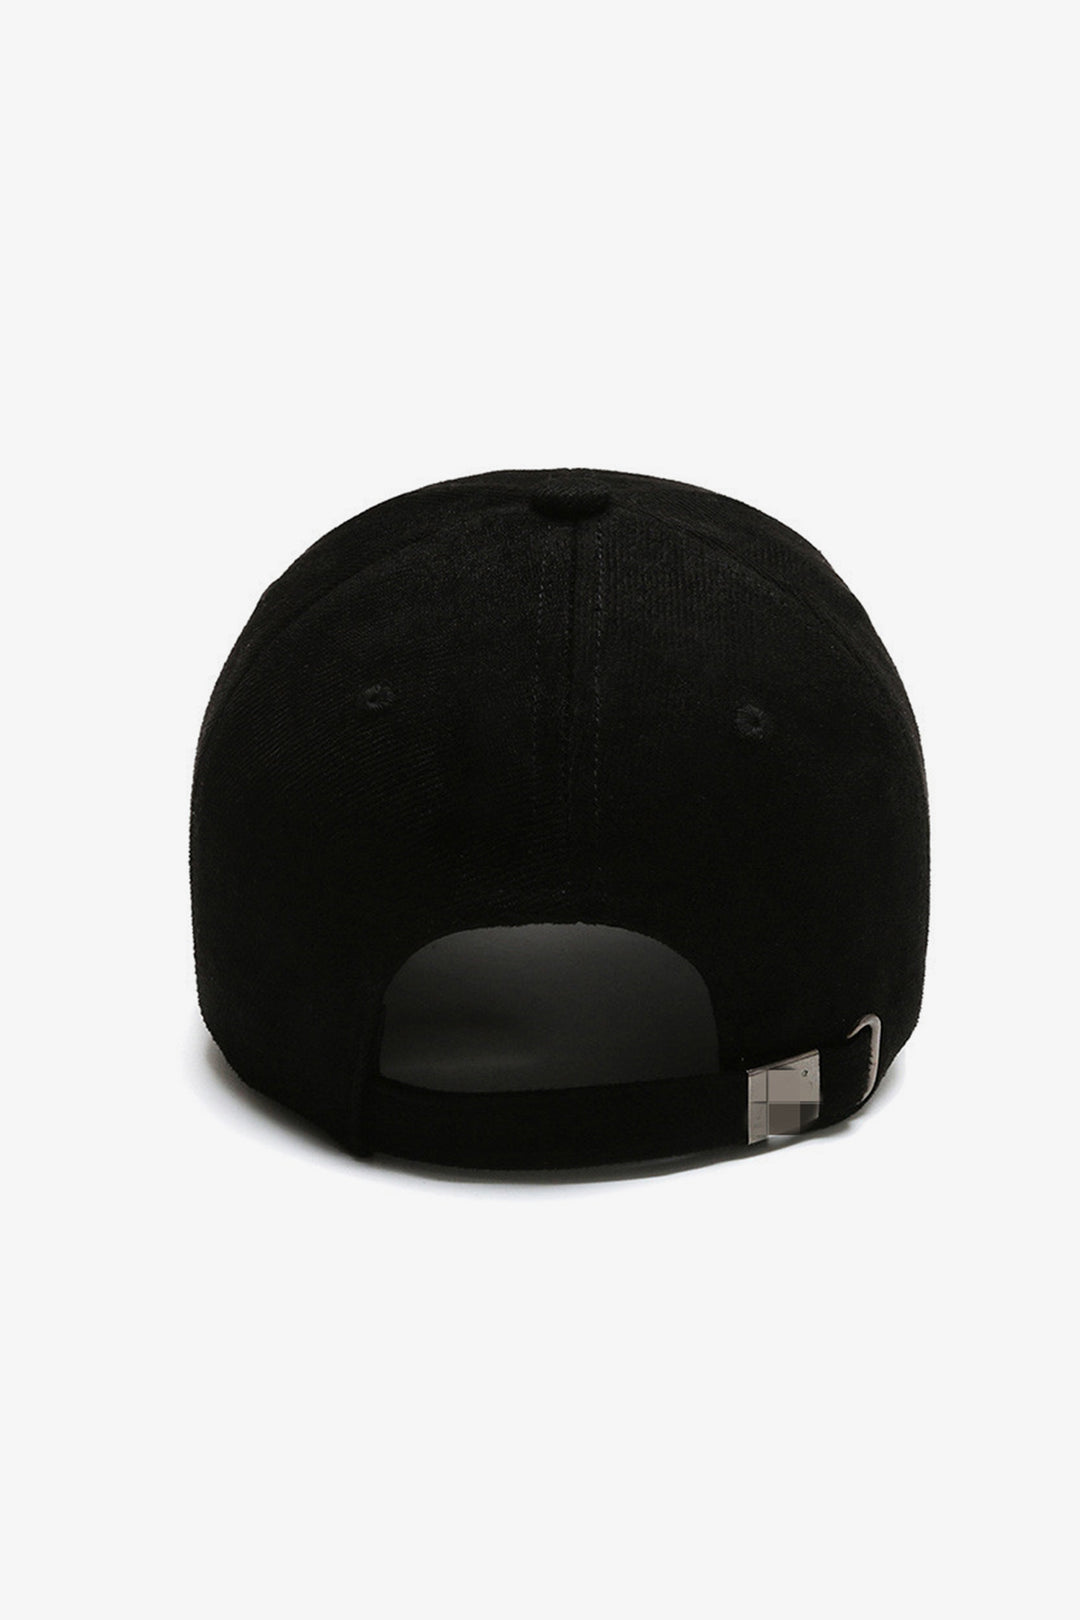 Be Yourself Black Embroidered Casual Cap - S23 - MCP089R